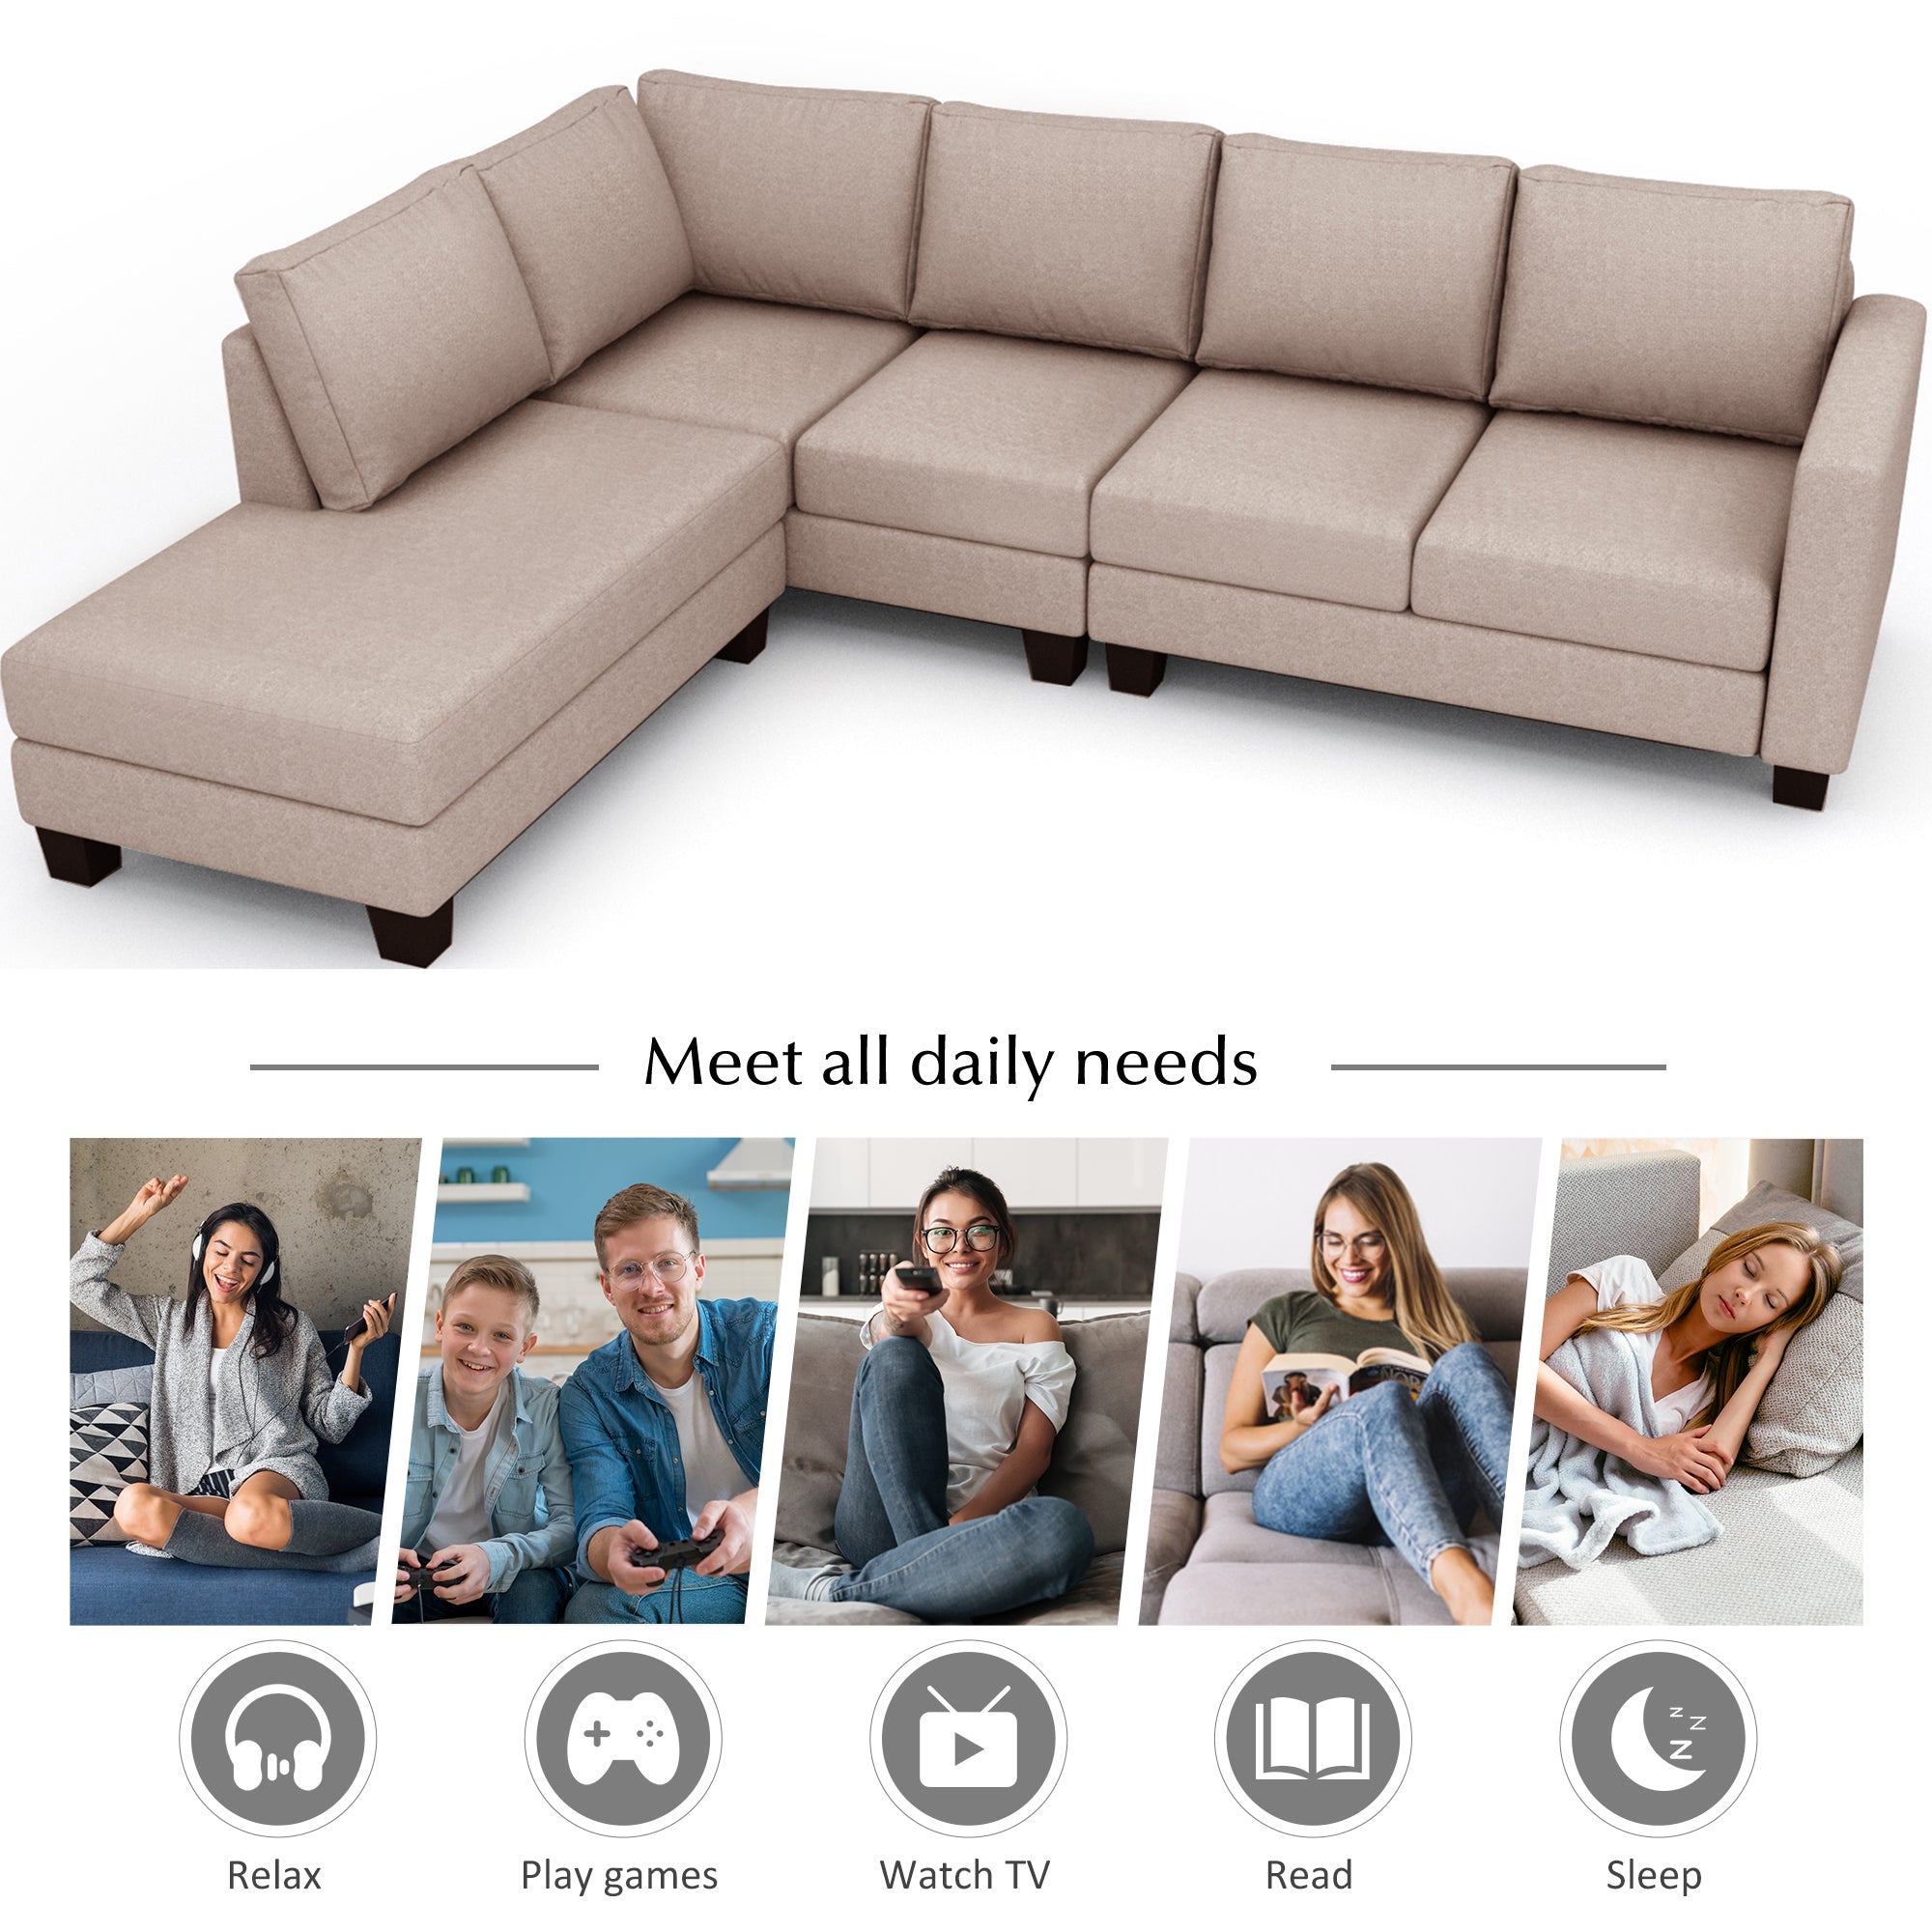 107.25*87"Textured Fabric L-shaped Sofa With 5 Seaters